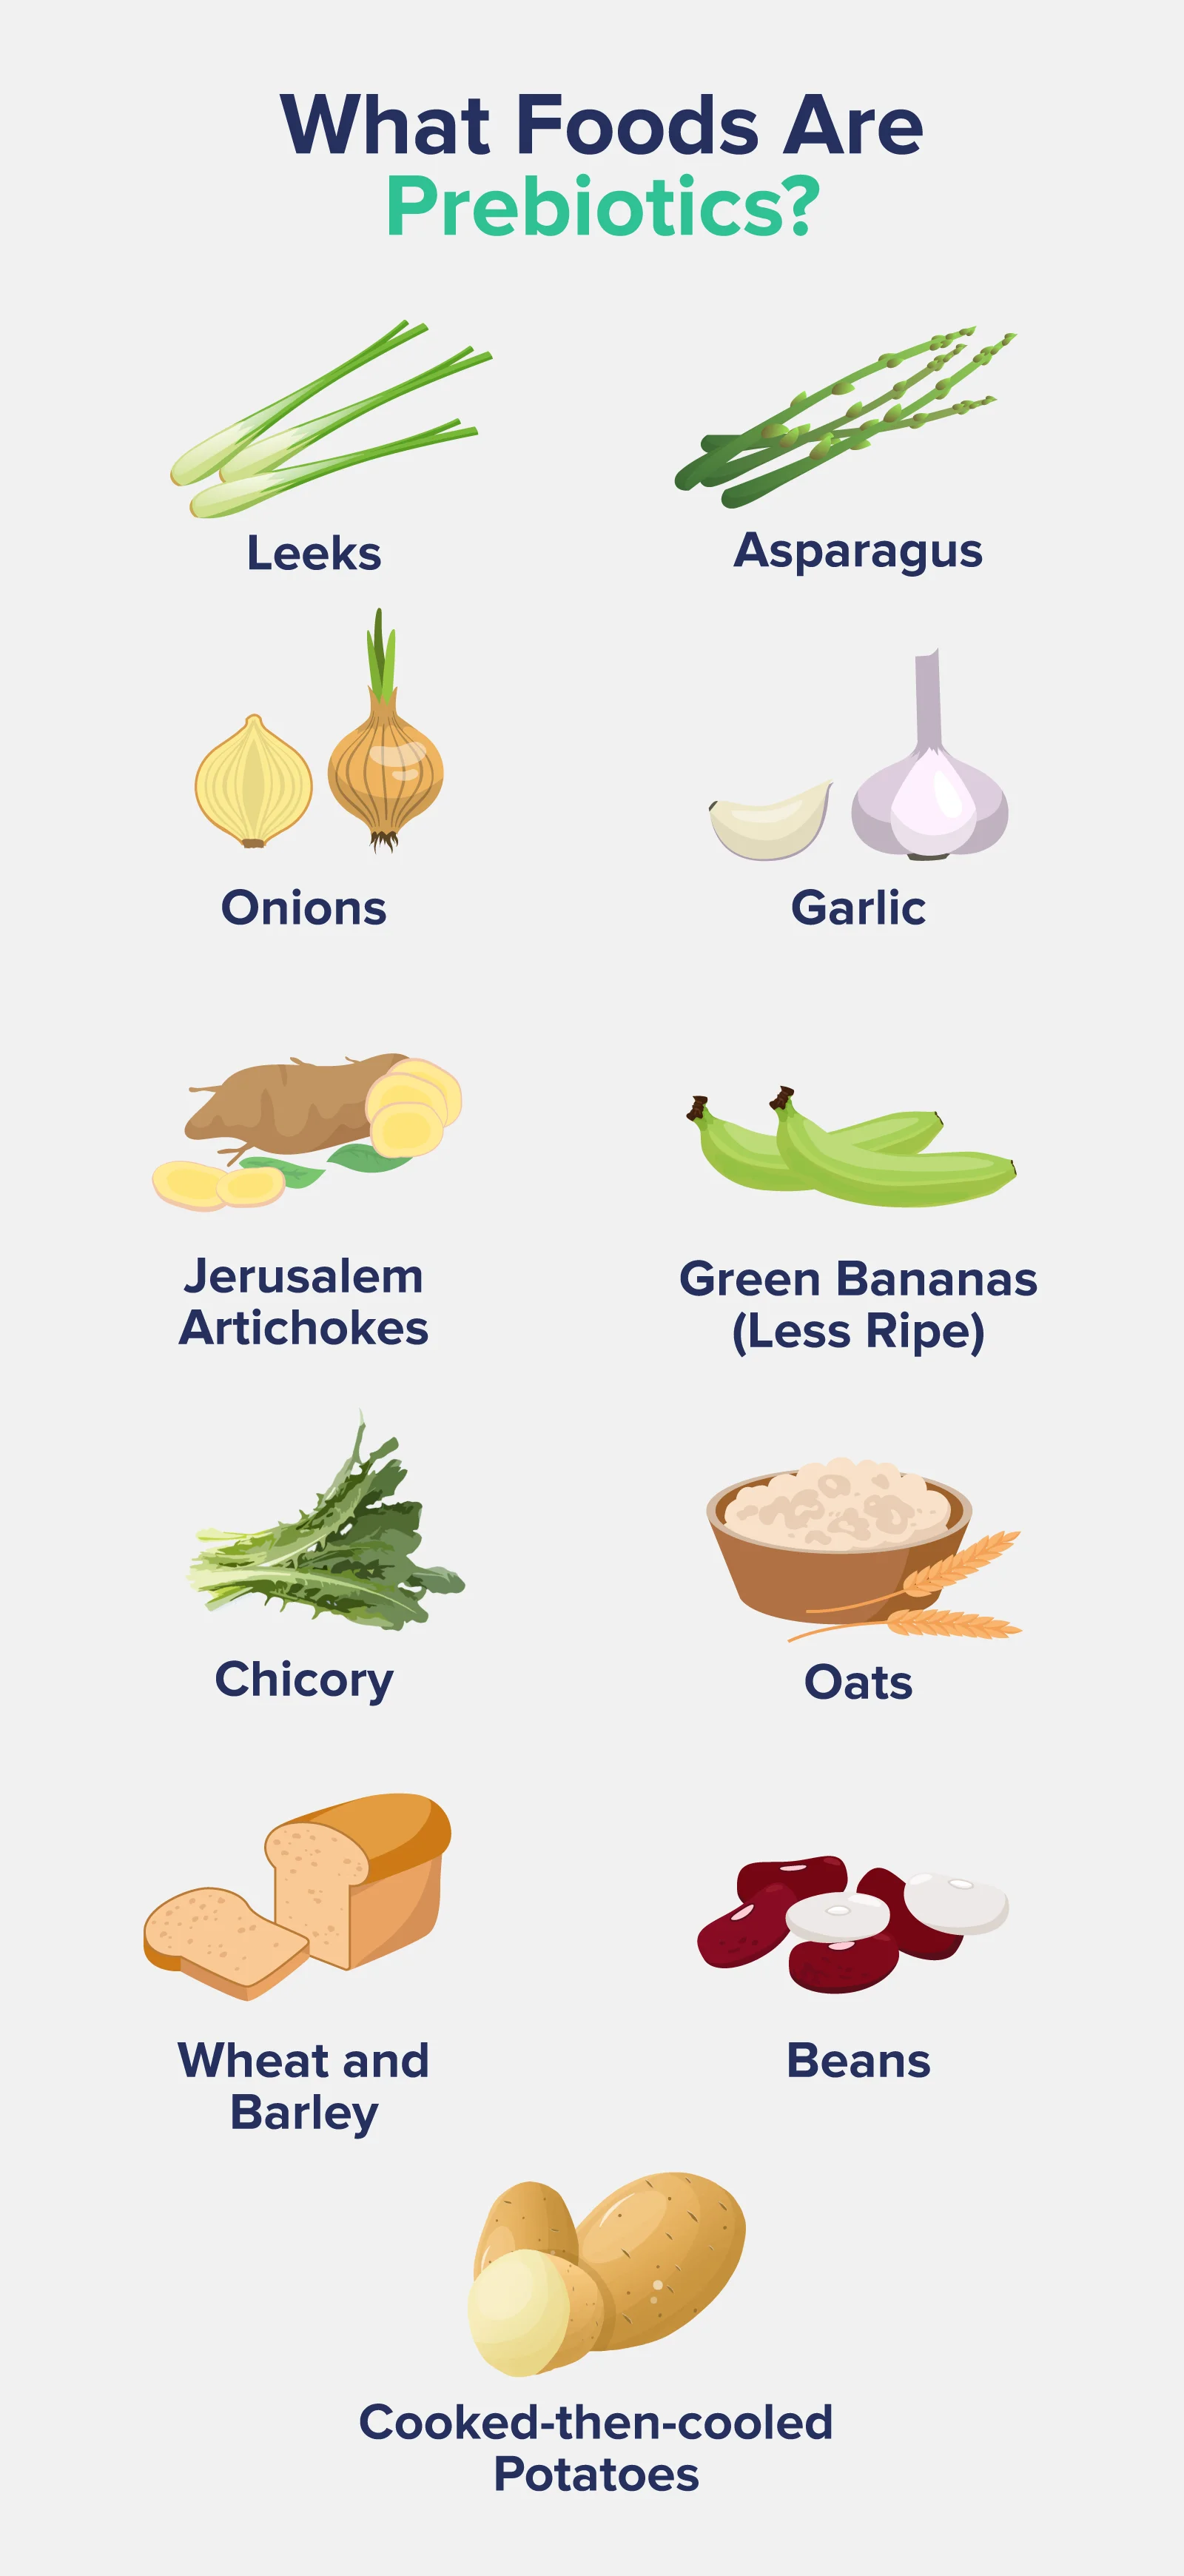 List of foods that are probioticsLeeksAsparagusChicory Green bananas (less ripe)Jerusalem artichokes (sunchokes)GarlicOnionsCertain whole grains like wheat and barleyOatsBeans Cooked-then-cooled potatoes 